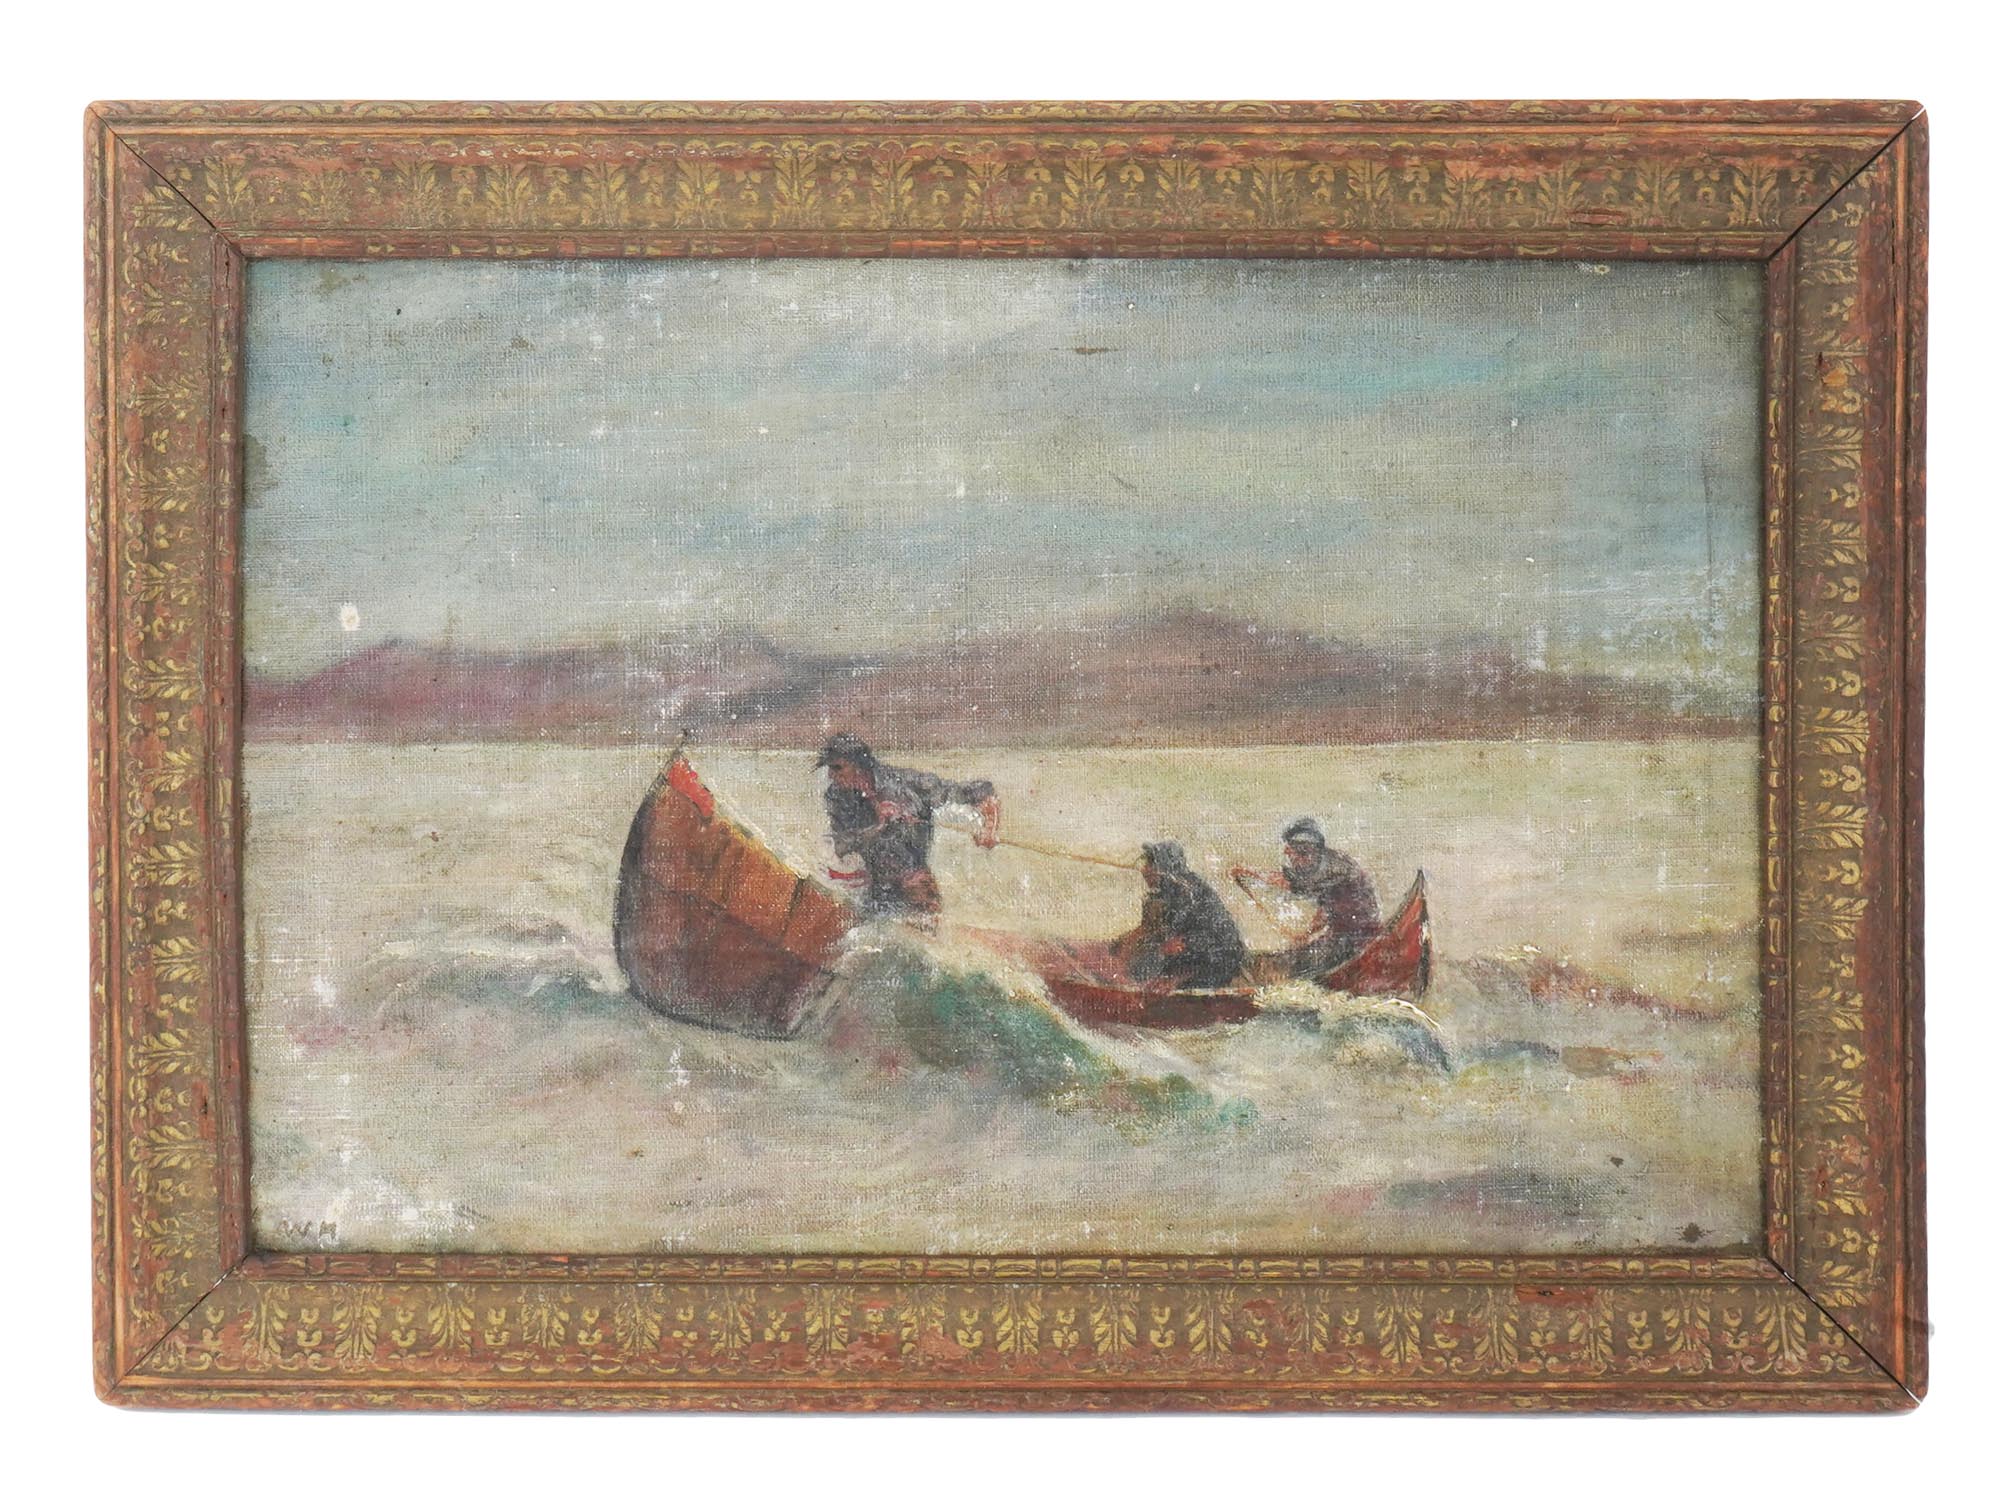 ANTIQUE AMERICAN OIL PAINTING BY WINSLOW HOMER PIC-0